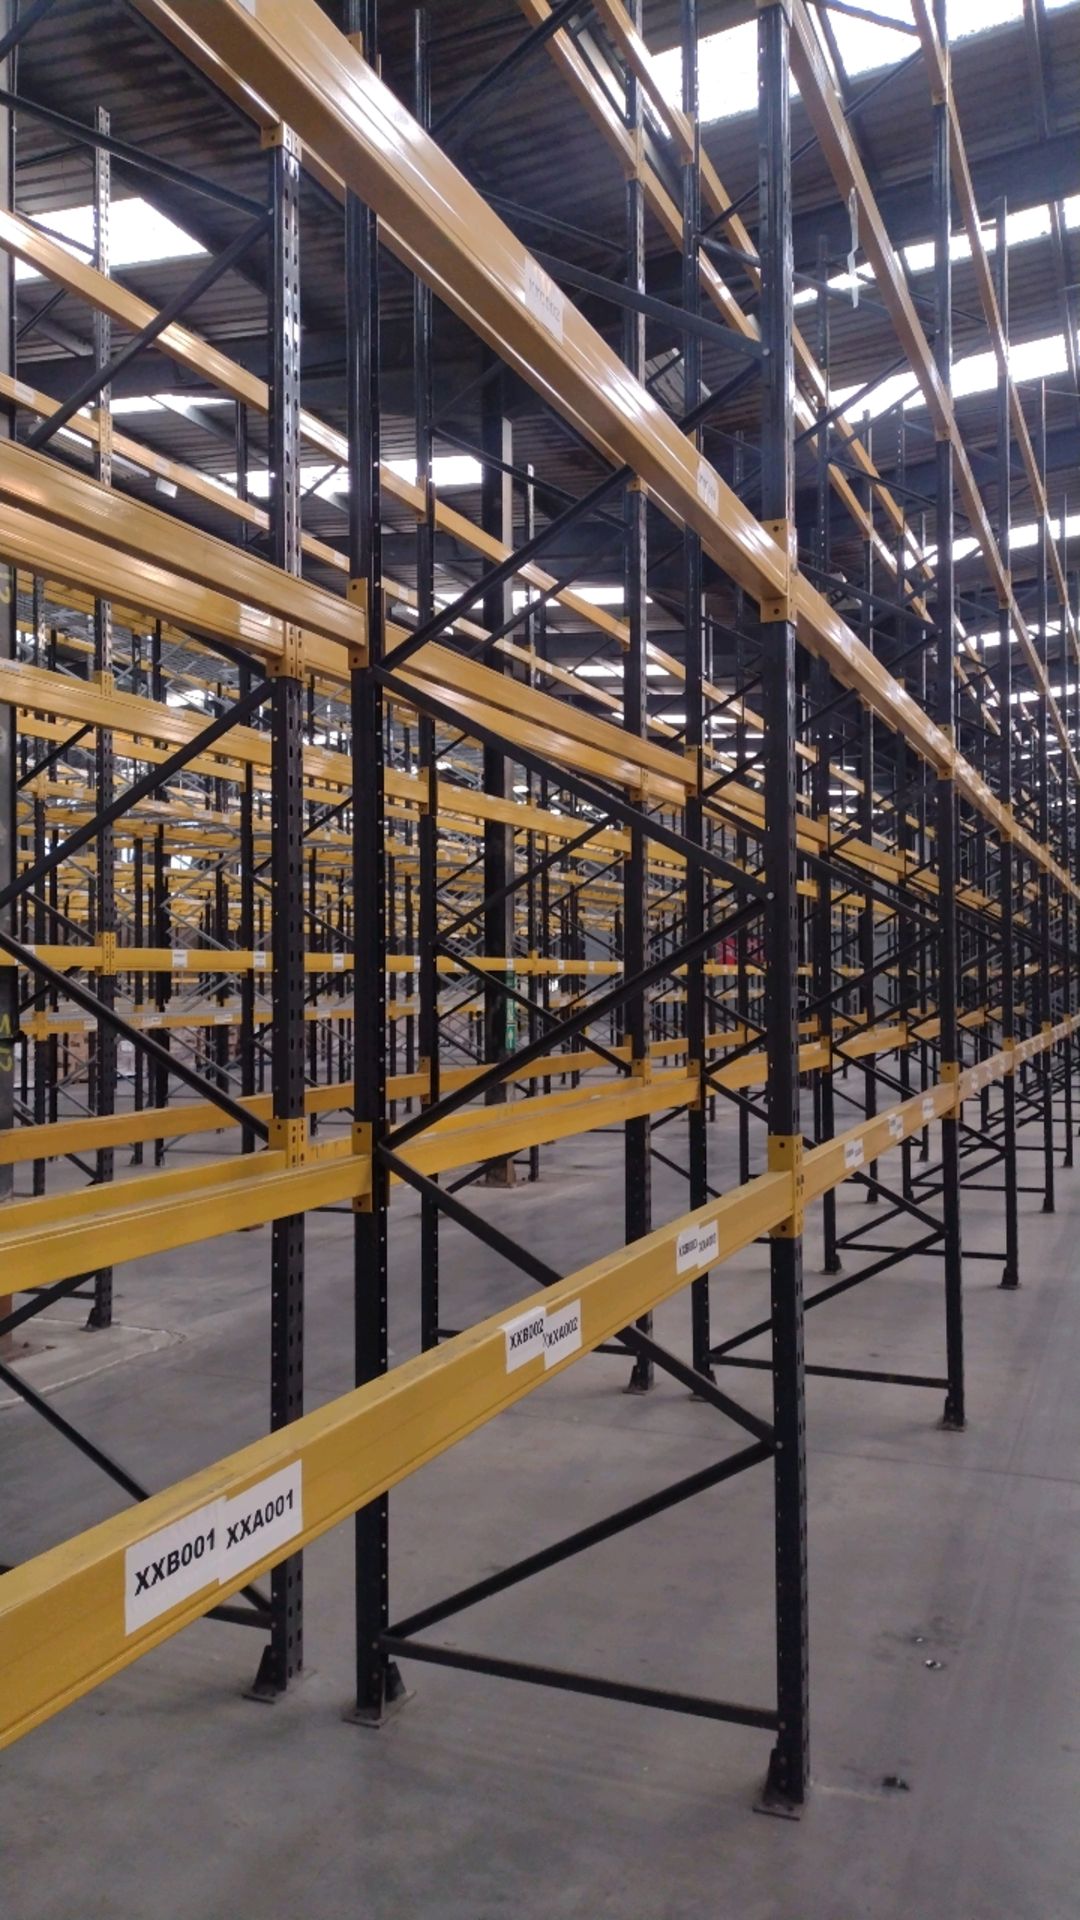 40 Bays Of Back To Back Boltless Industrial Pallet Racking - Image 2 of 10